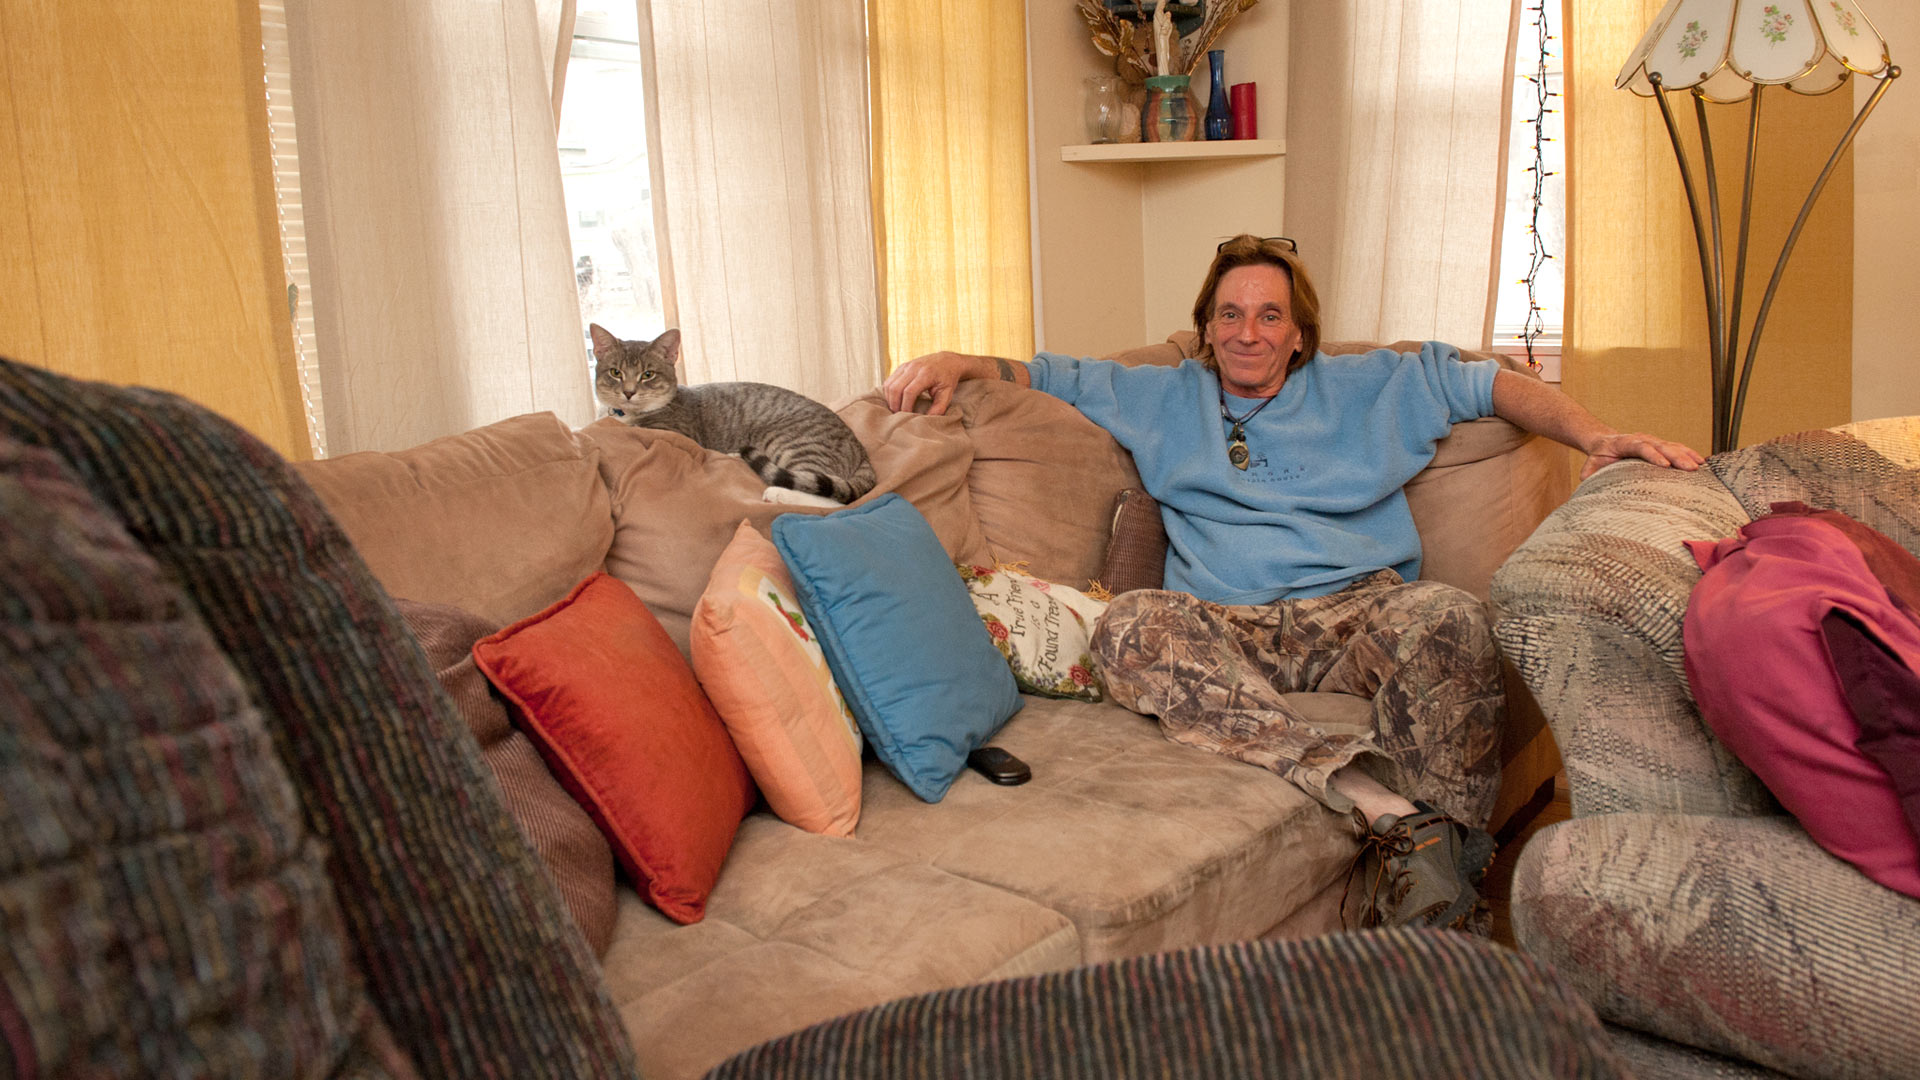 Man sitting on a couch with a cat